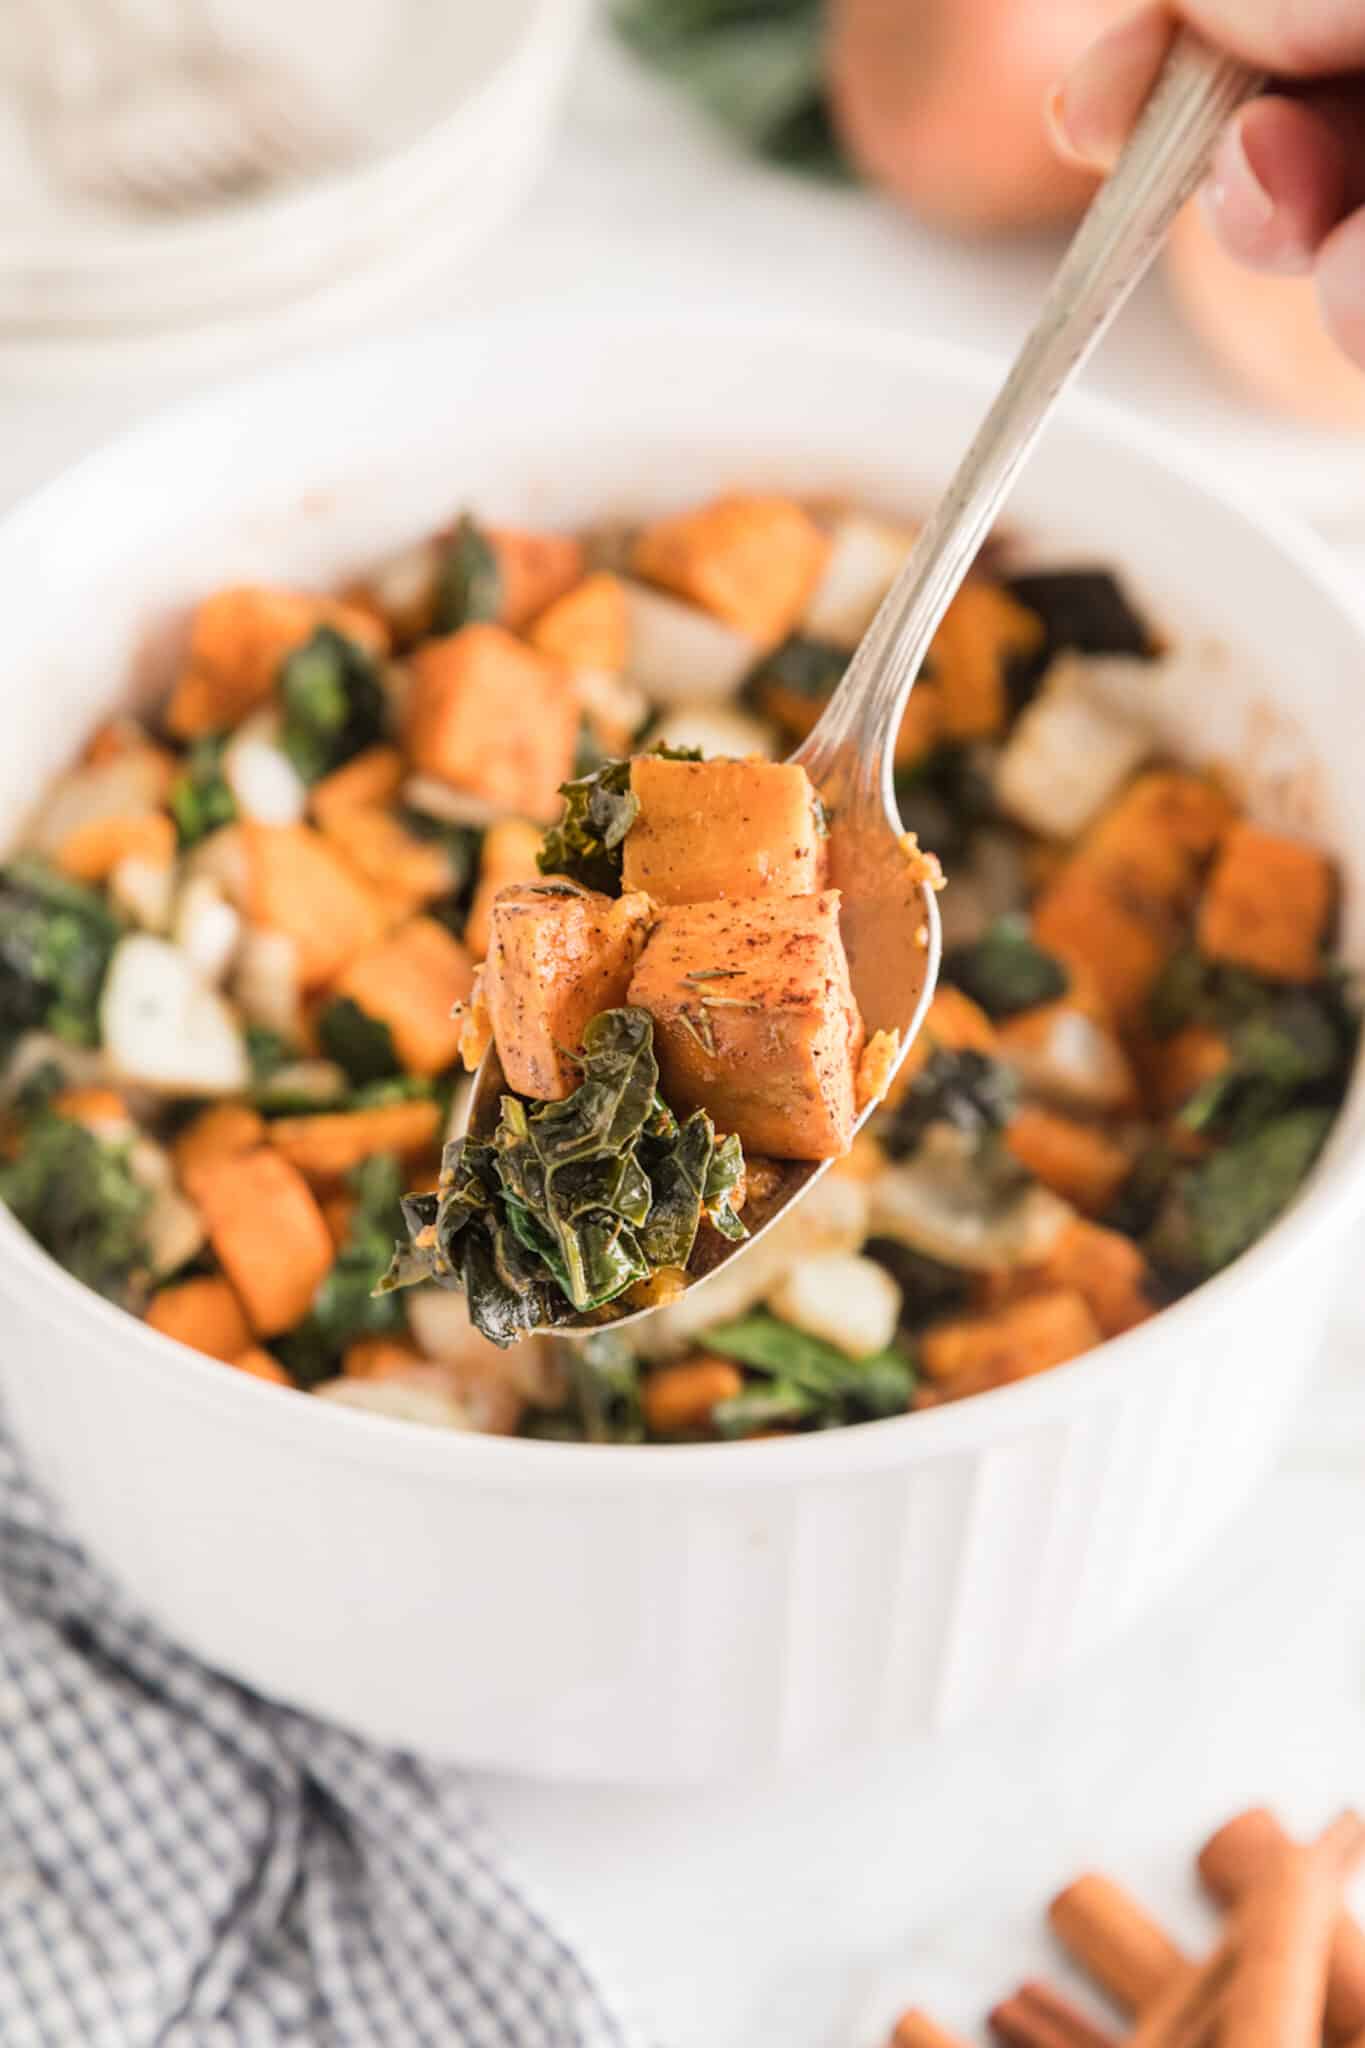 A forkful of sweet potato and kale over the serving bowl.